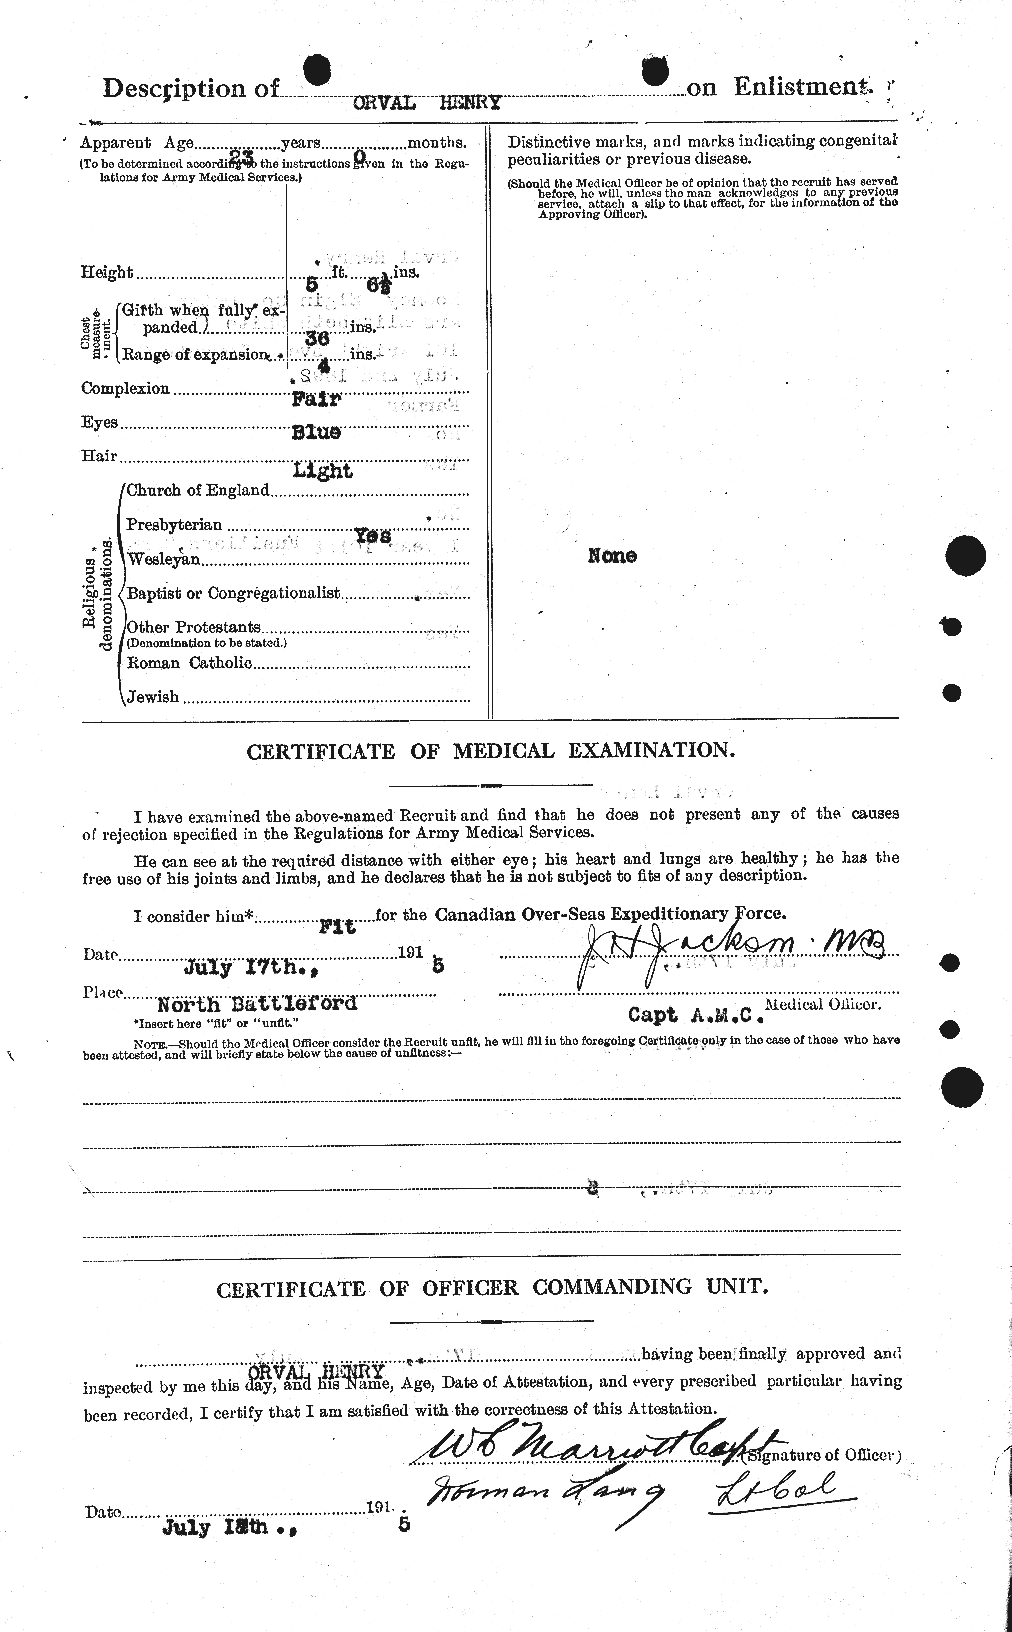 Personnel Records of the First World War - CEF 387676b